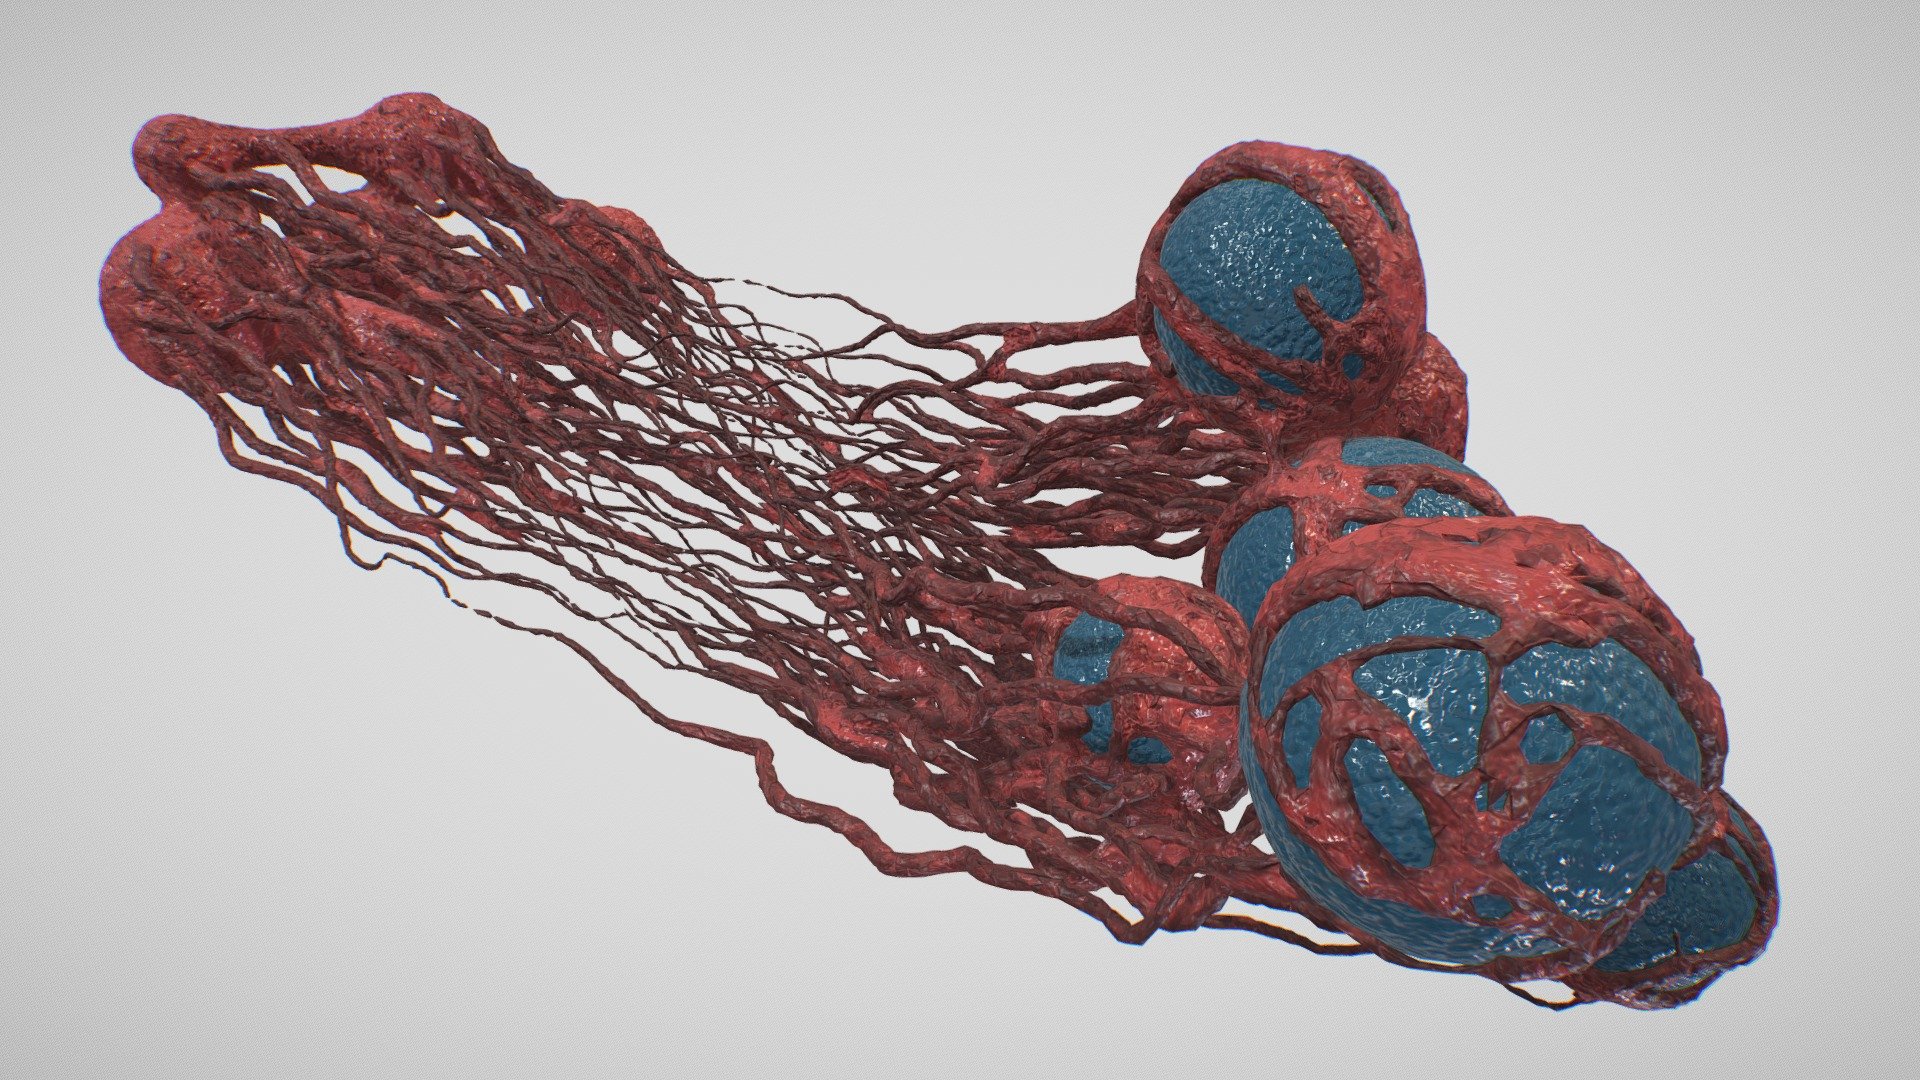 3d model of the cancer growth lowpoly PBR - Cancer Growth 02 PBR - 3D model by djkorg 3d model